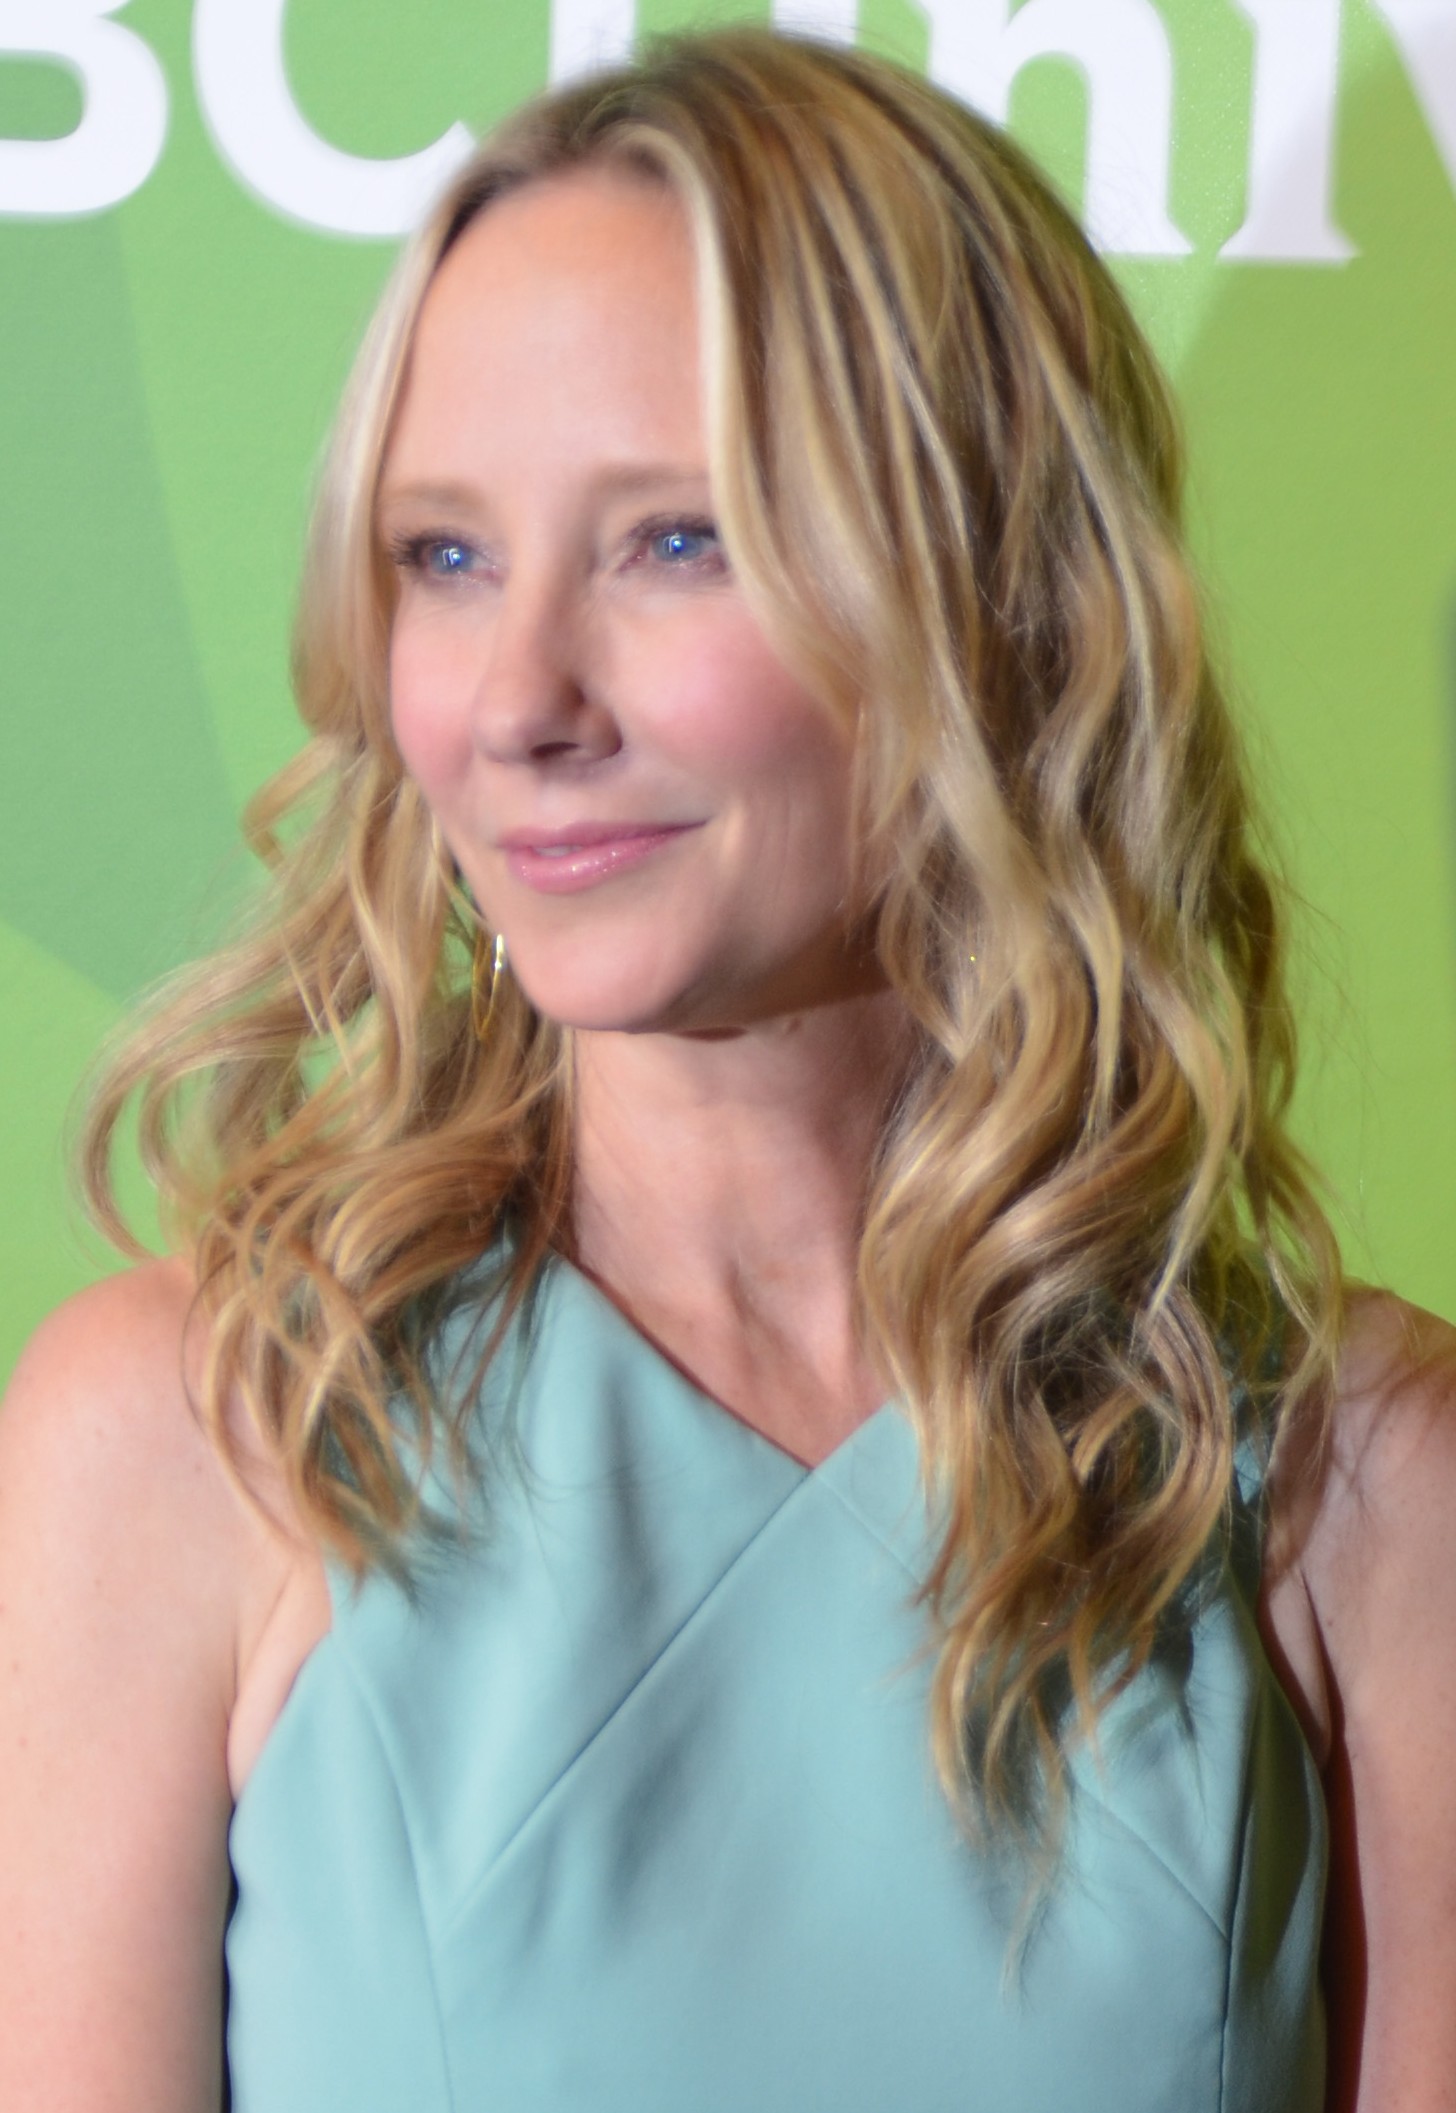 Anne Heche - Wikipedia, The Free Encyclopedia